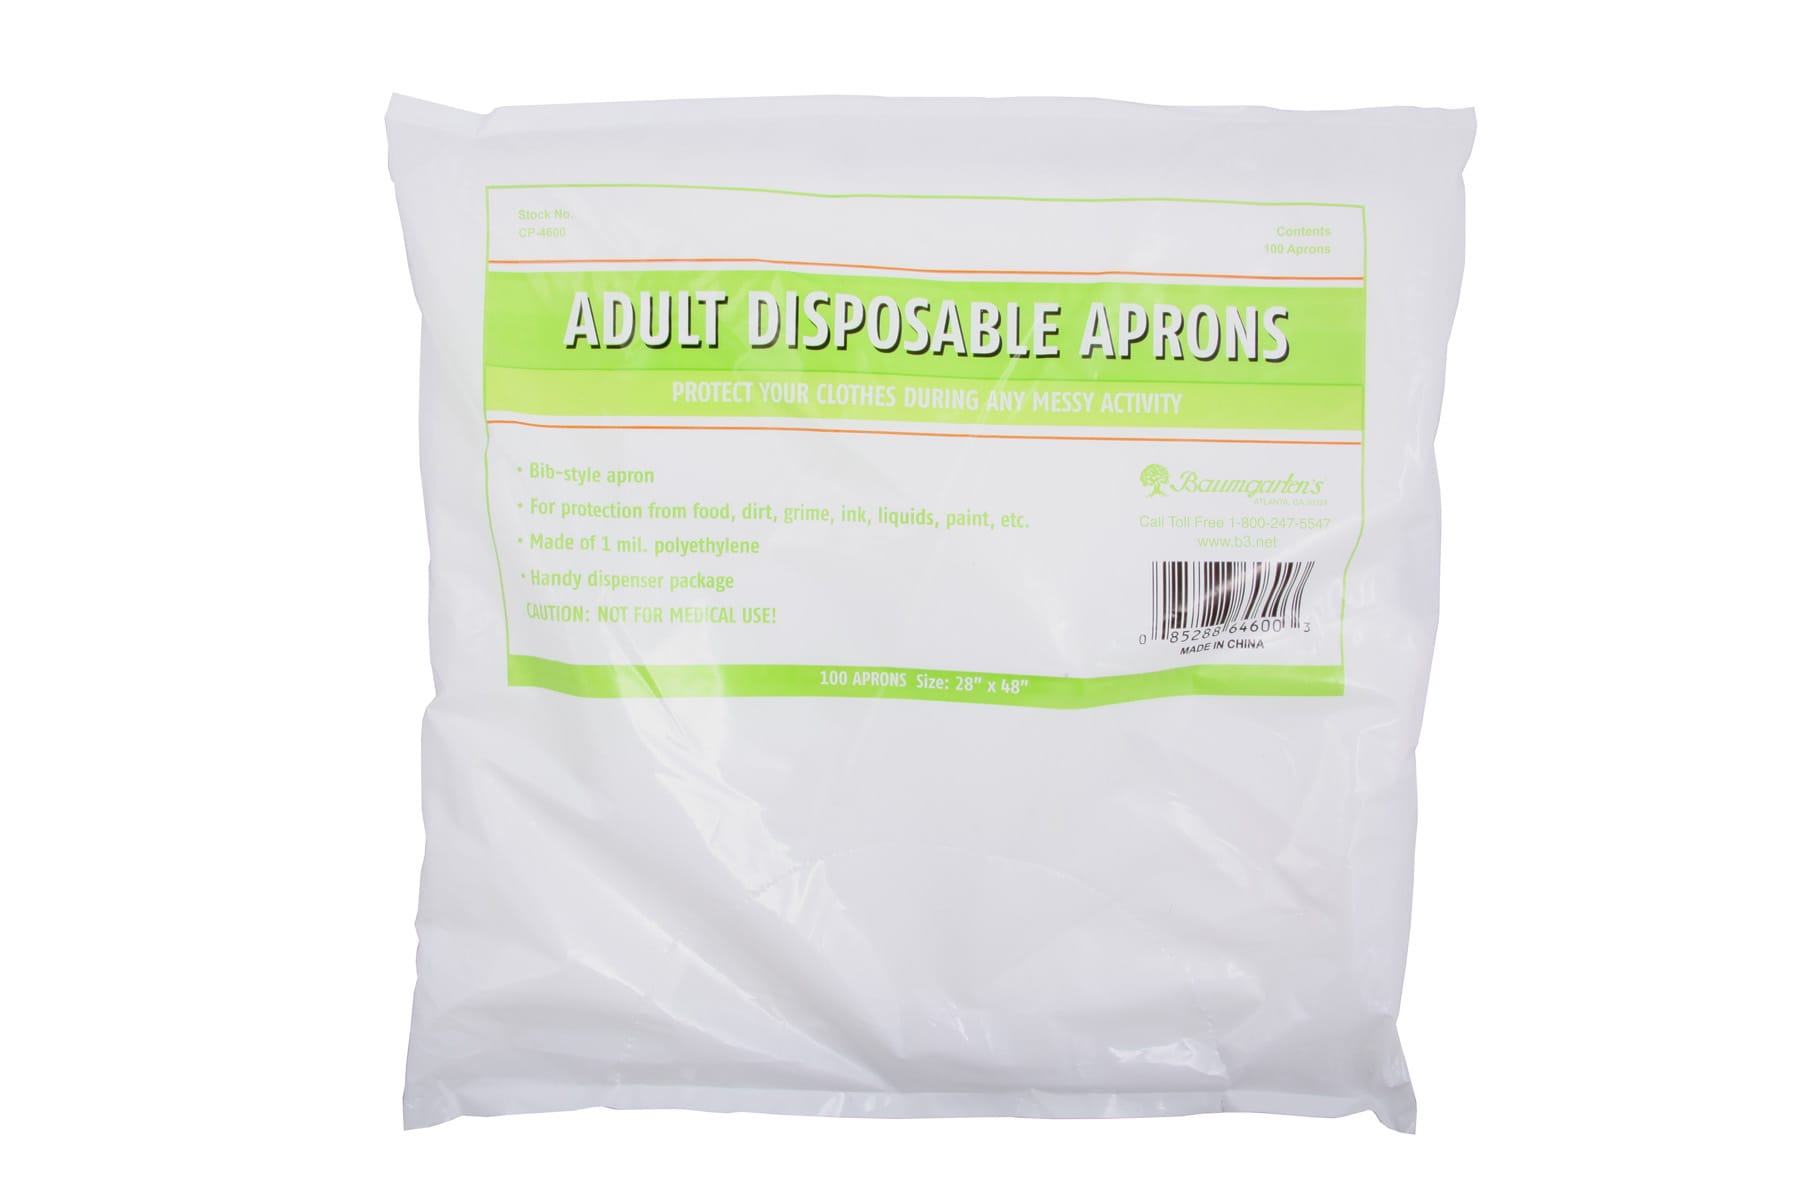 Baumgartens Bib Style Adult Disposable Aprons 100 Pack CLEAR (CP-4600)